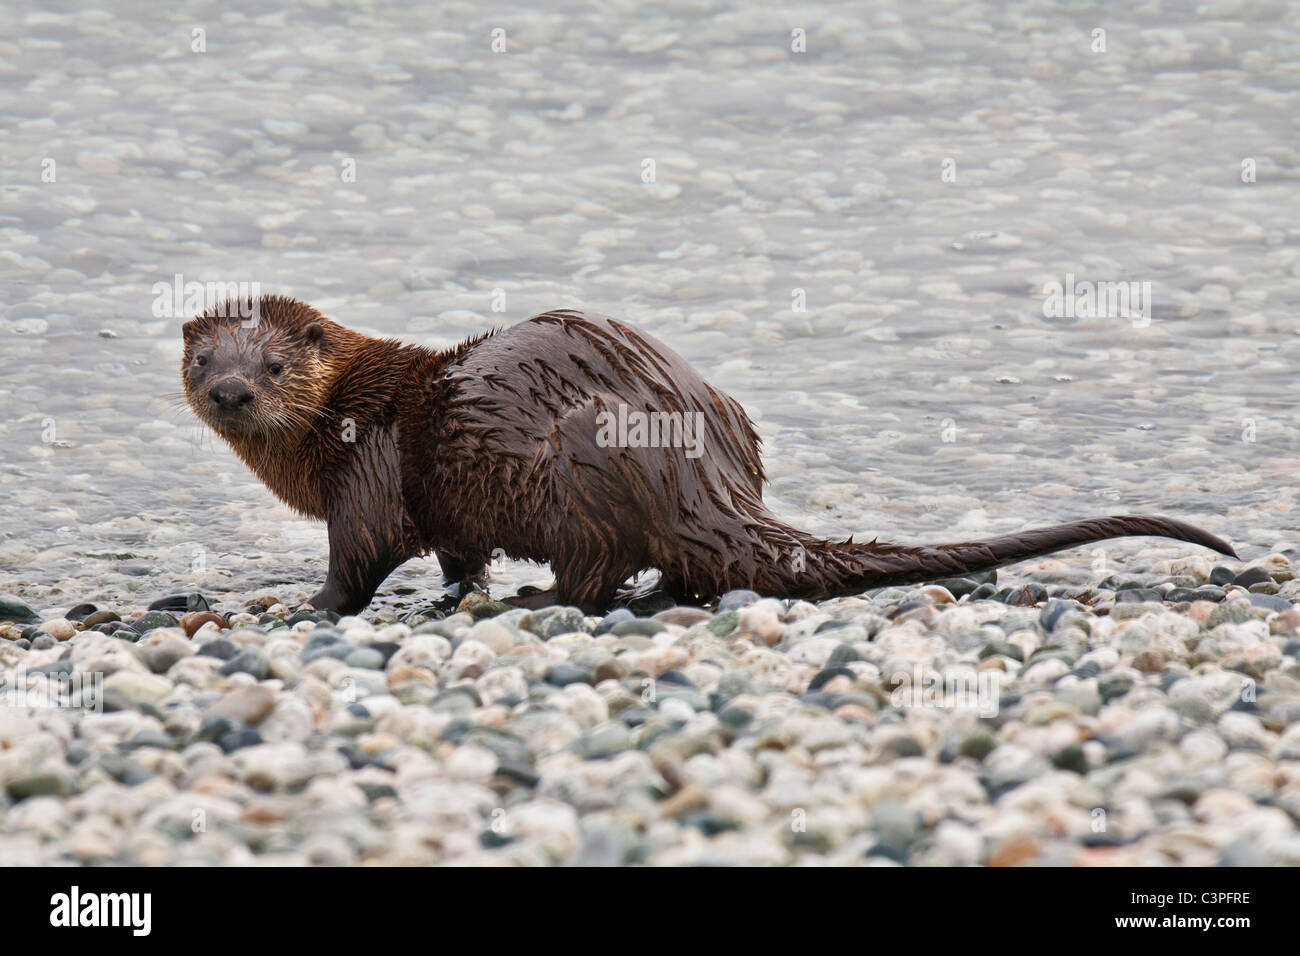 River otter about to enter pacific ocean from rocky beach-Victoria, British Columbia, Canada. Stock Photo